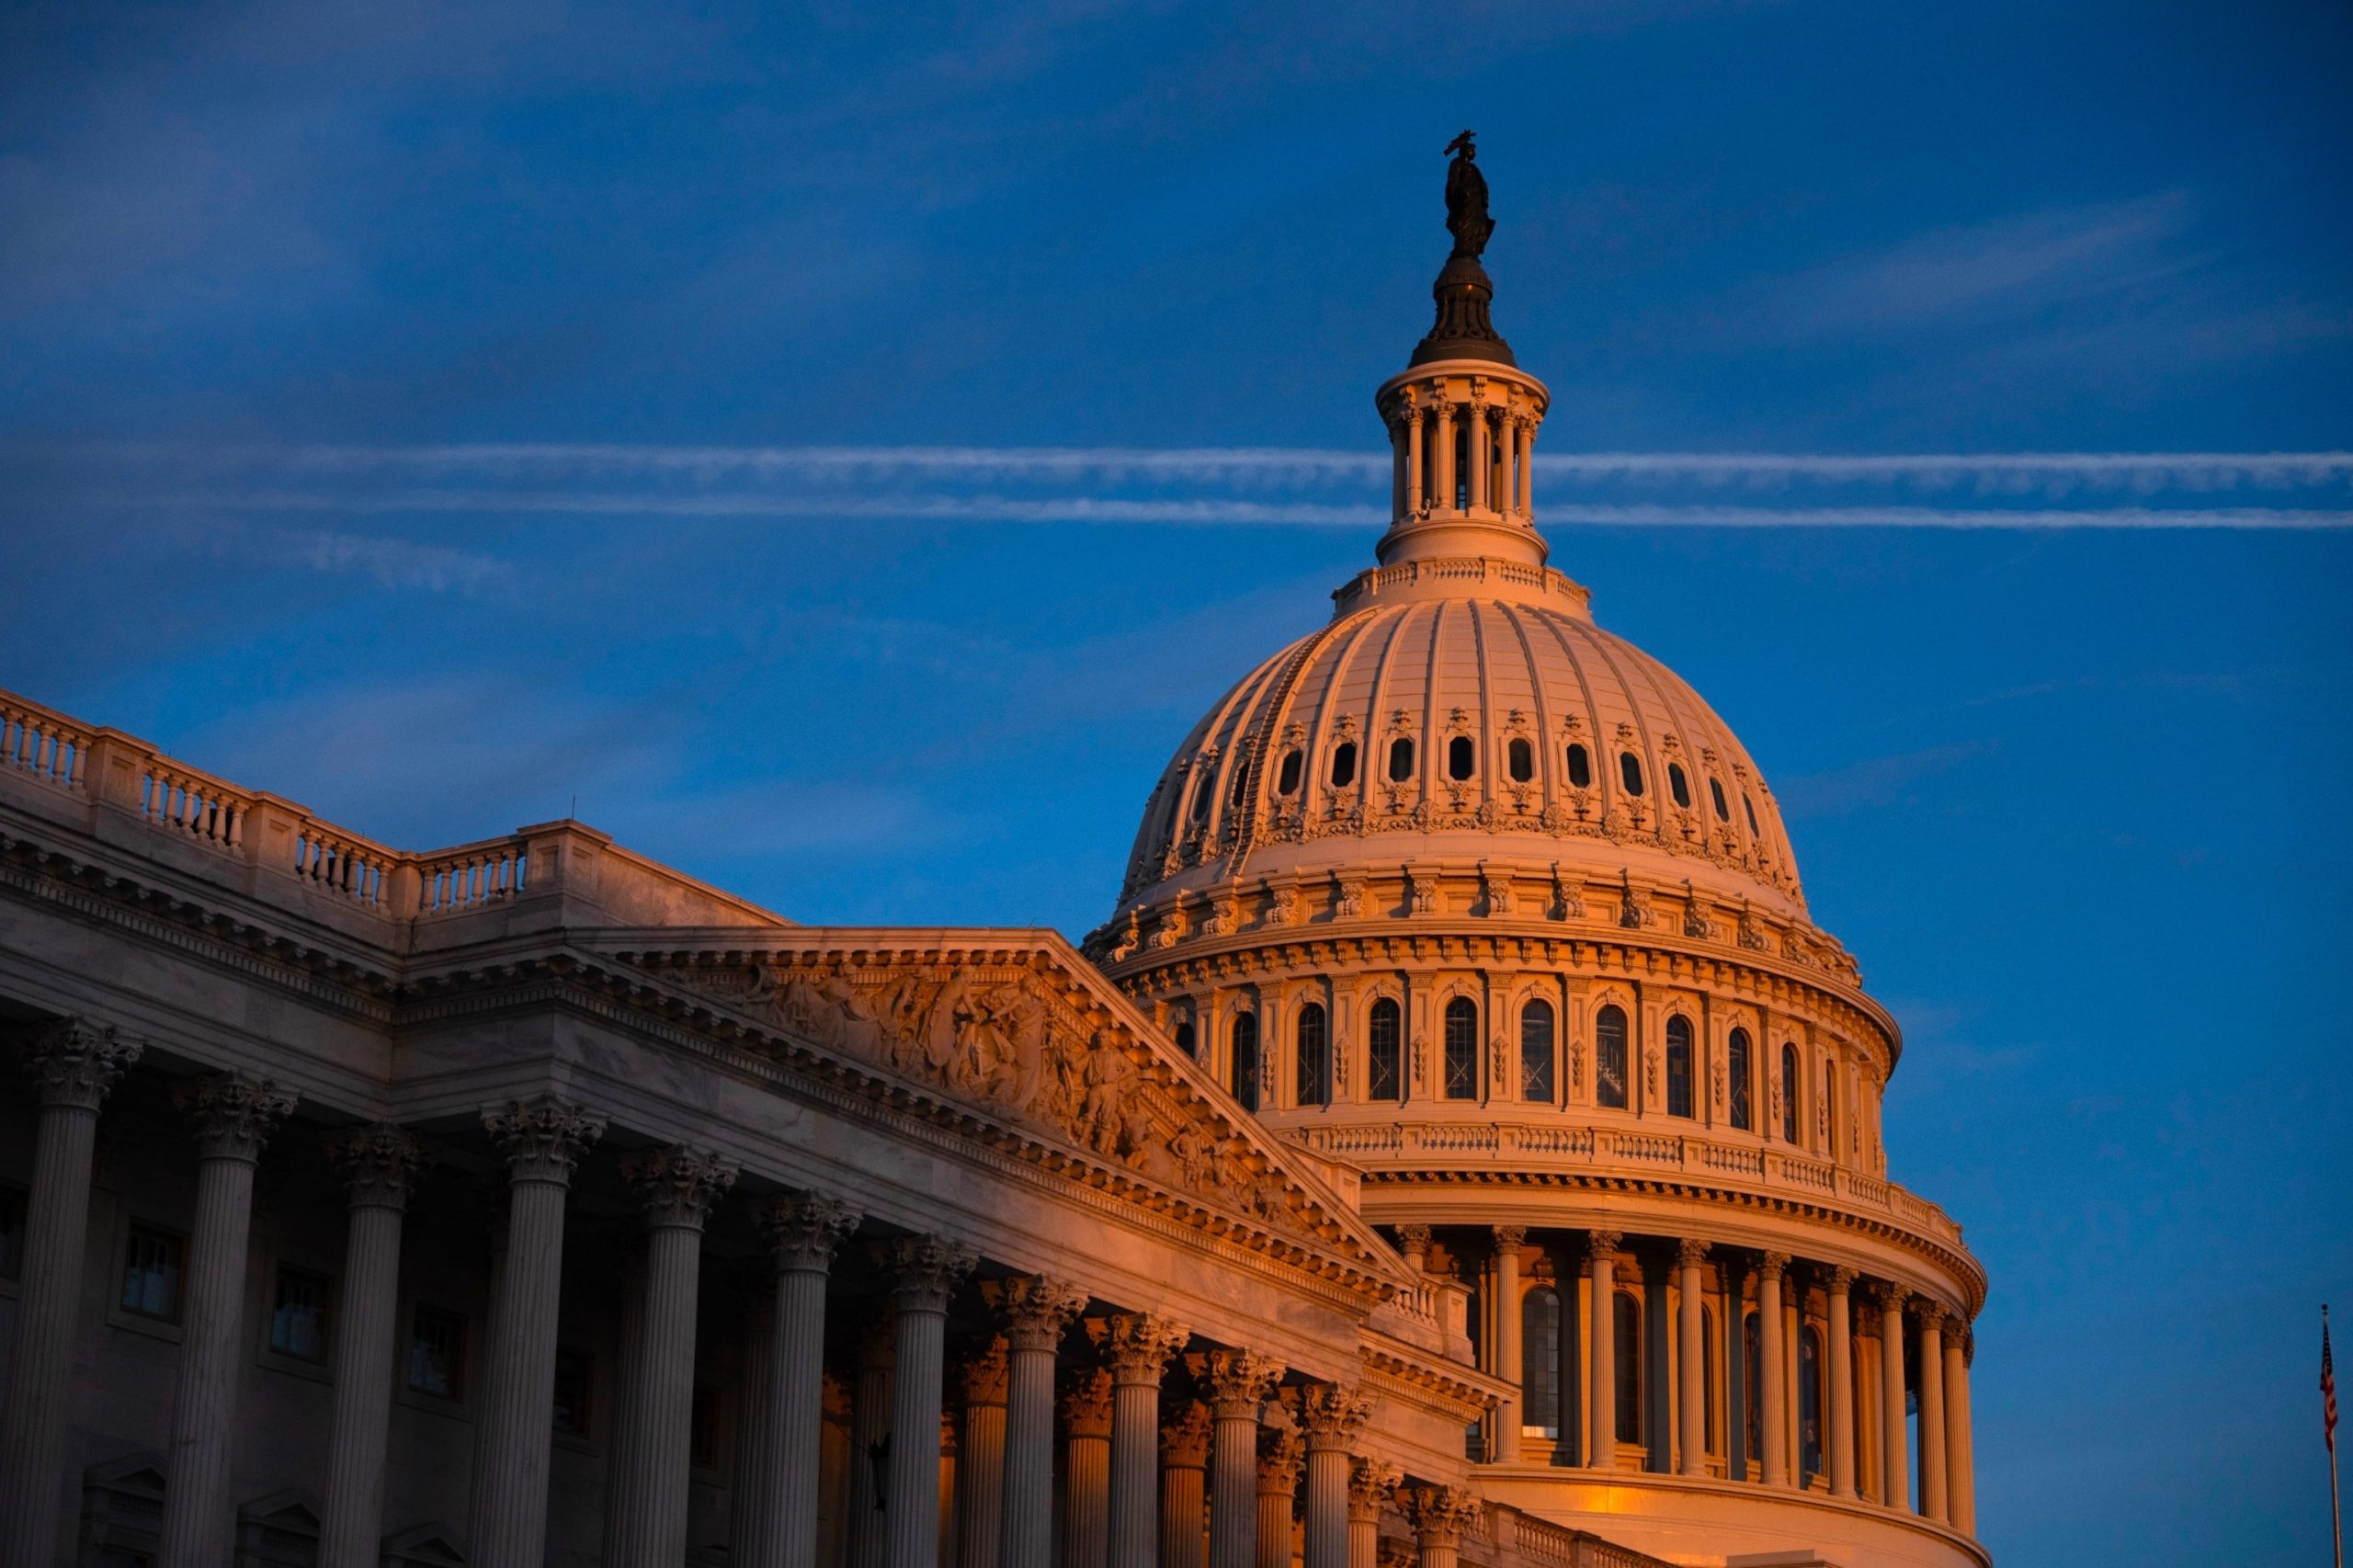 Time is running out to avert a looming government shutdown, despite agreement on DHS funding.